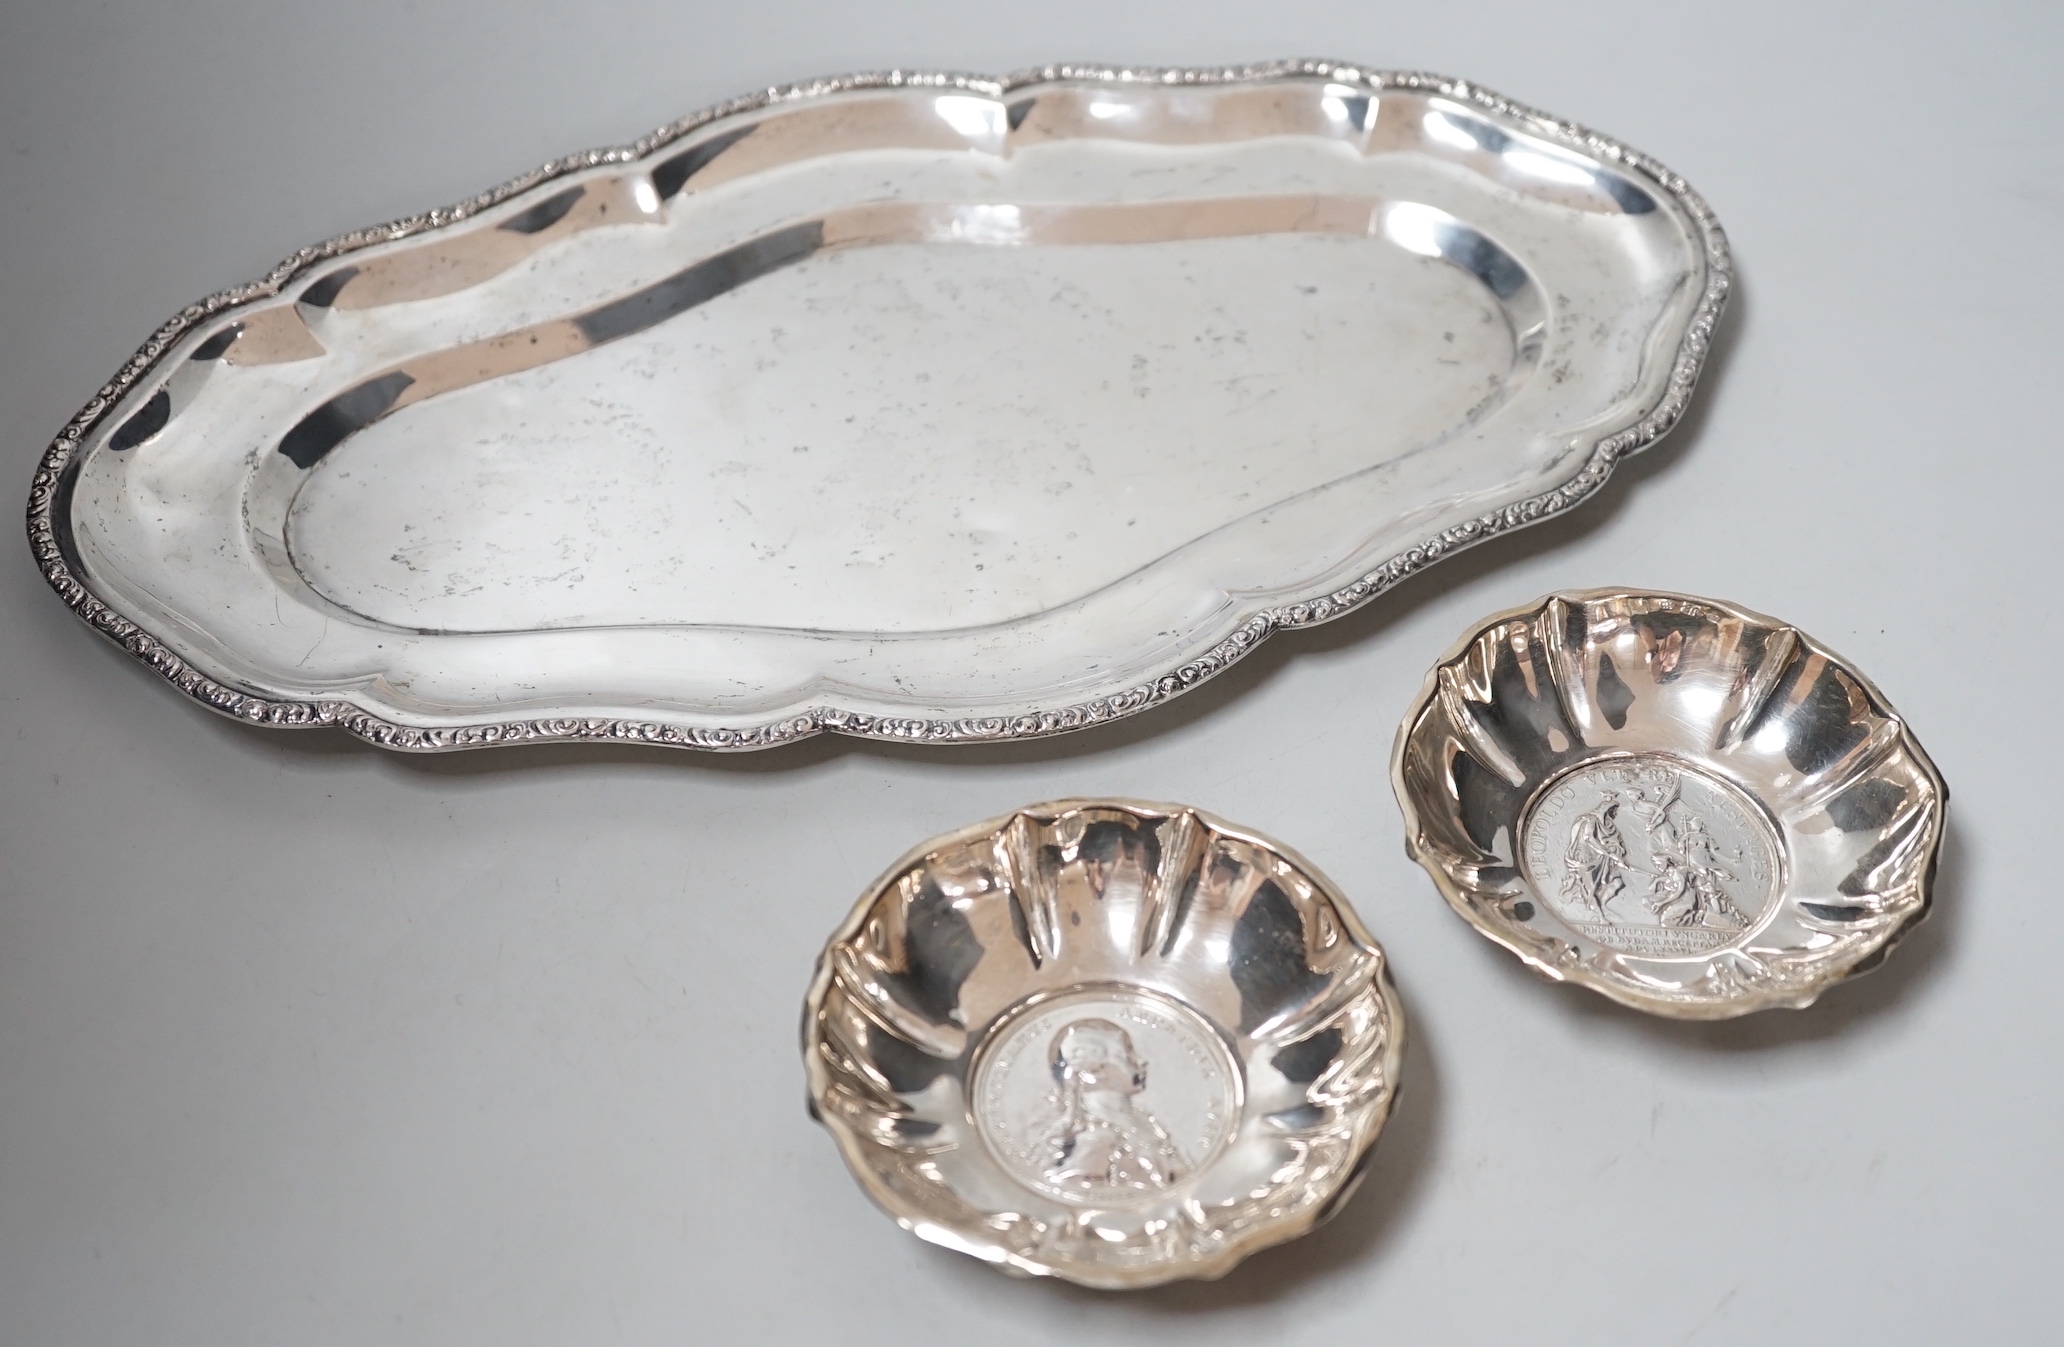 A 20th century Hungarian 800 standard white metal oval platter or stand, 33.2cm, and two 800 white metal bowls with inset coin bases, gross weight 15.5oz.